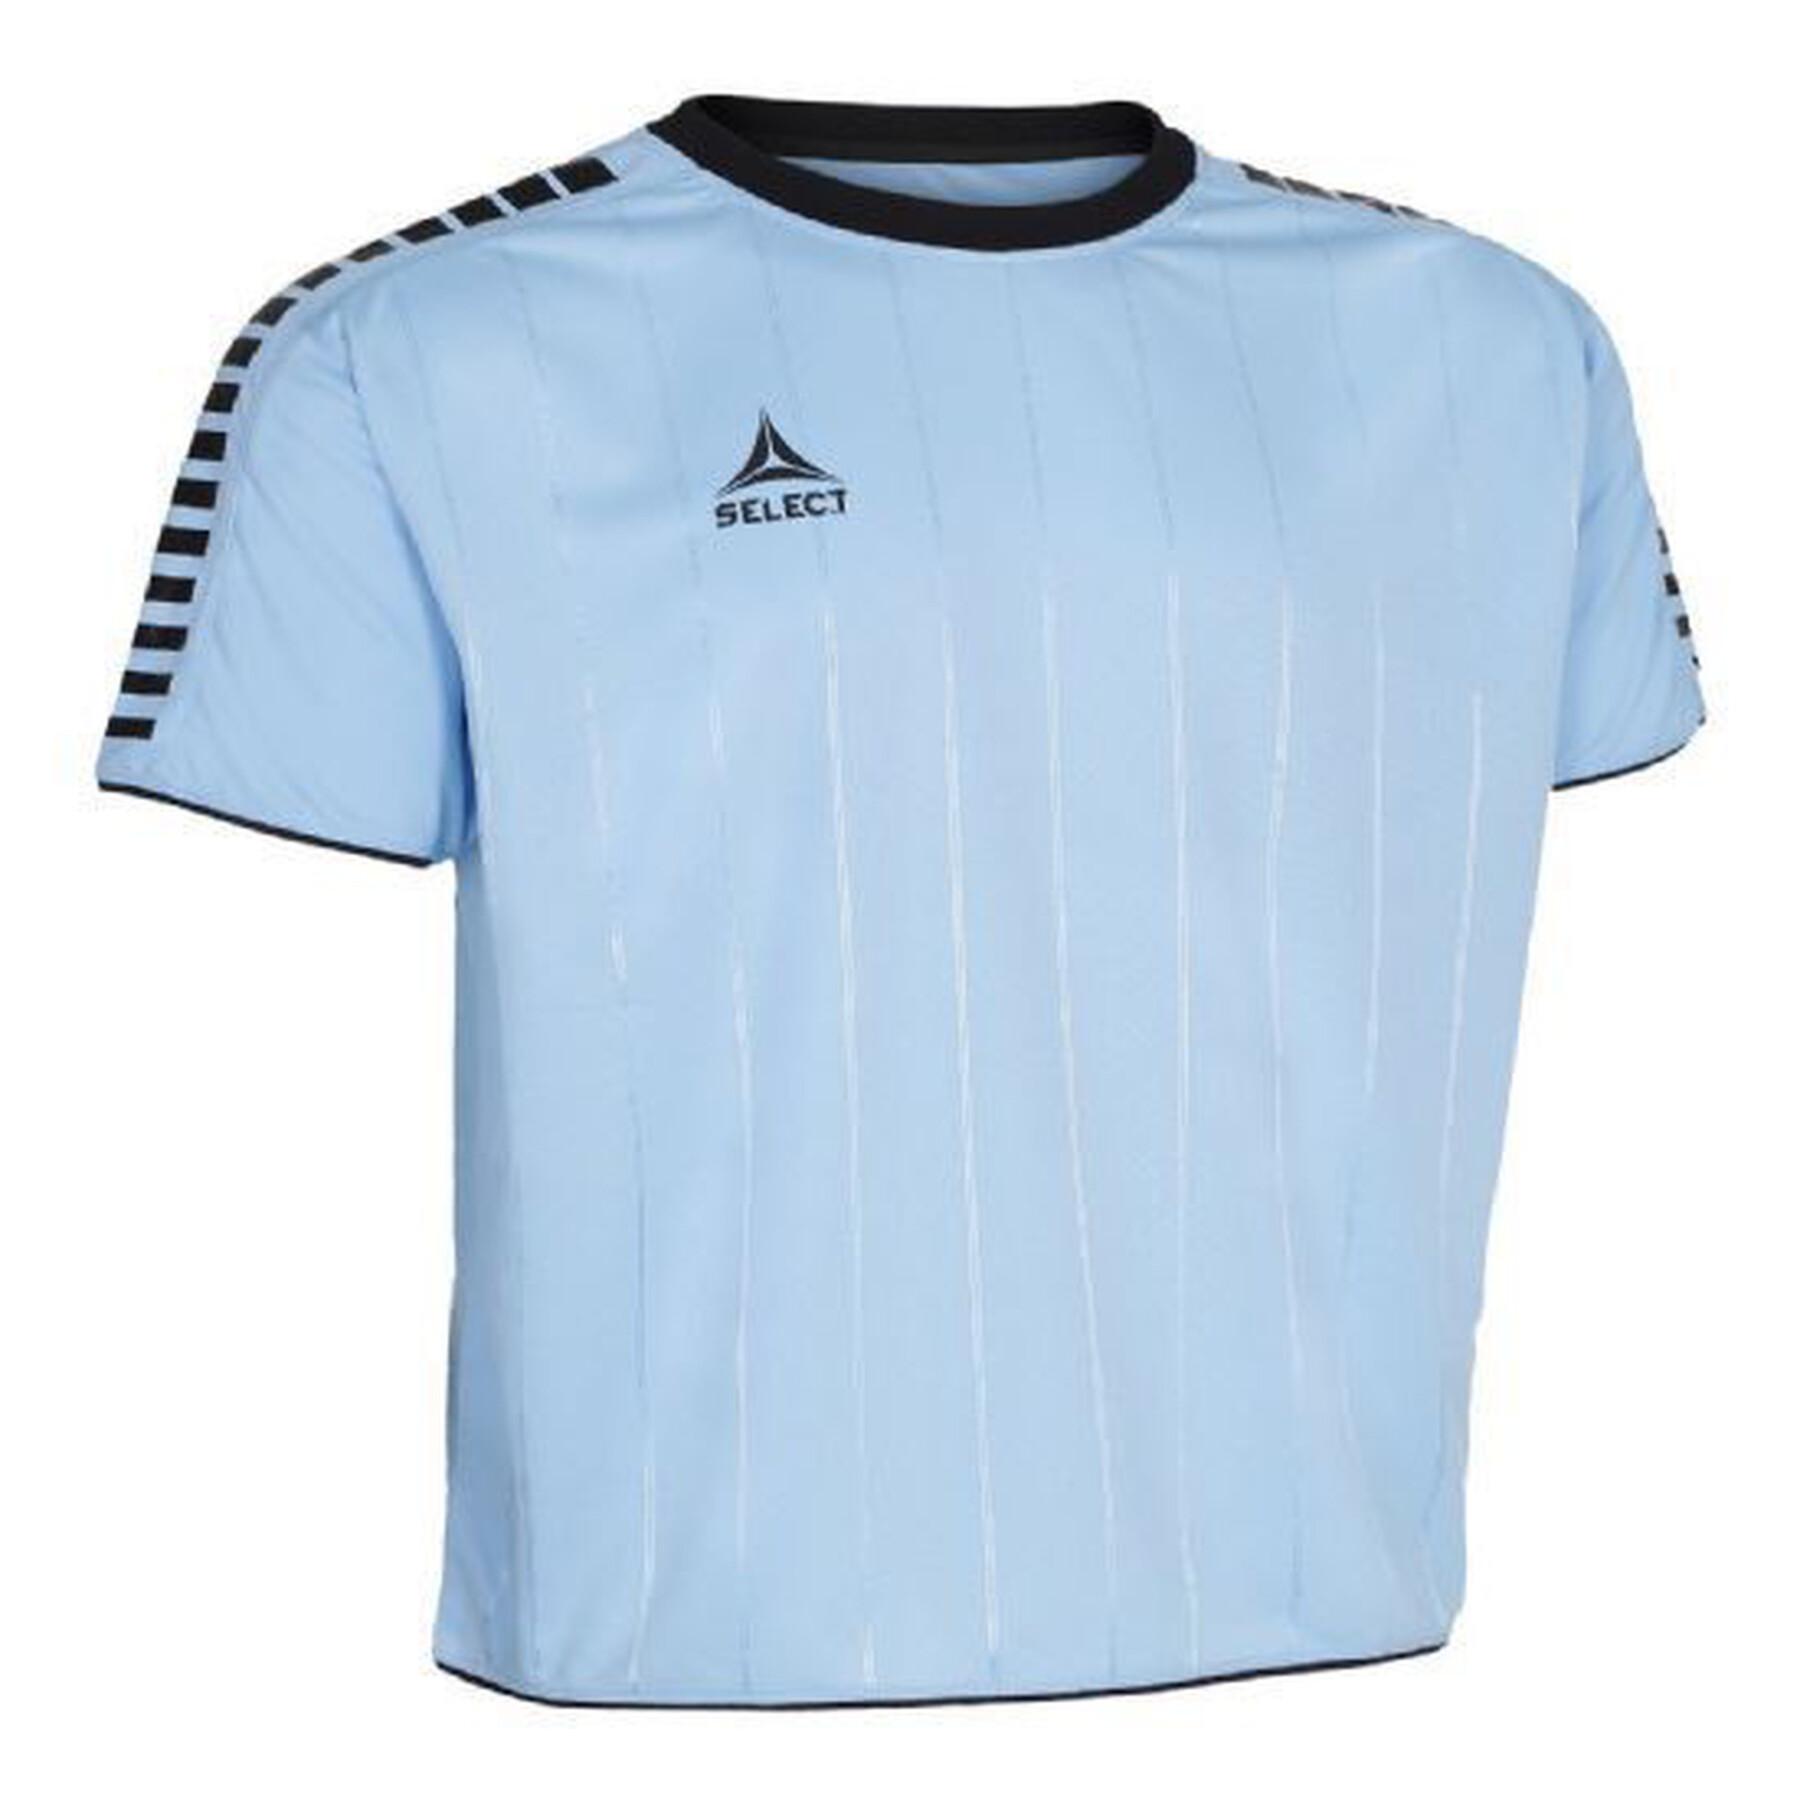 Children's jersey Select Argentina